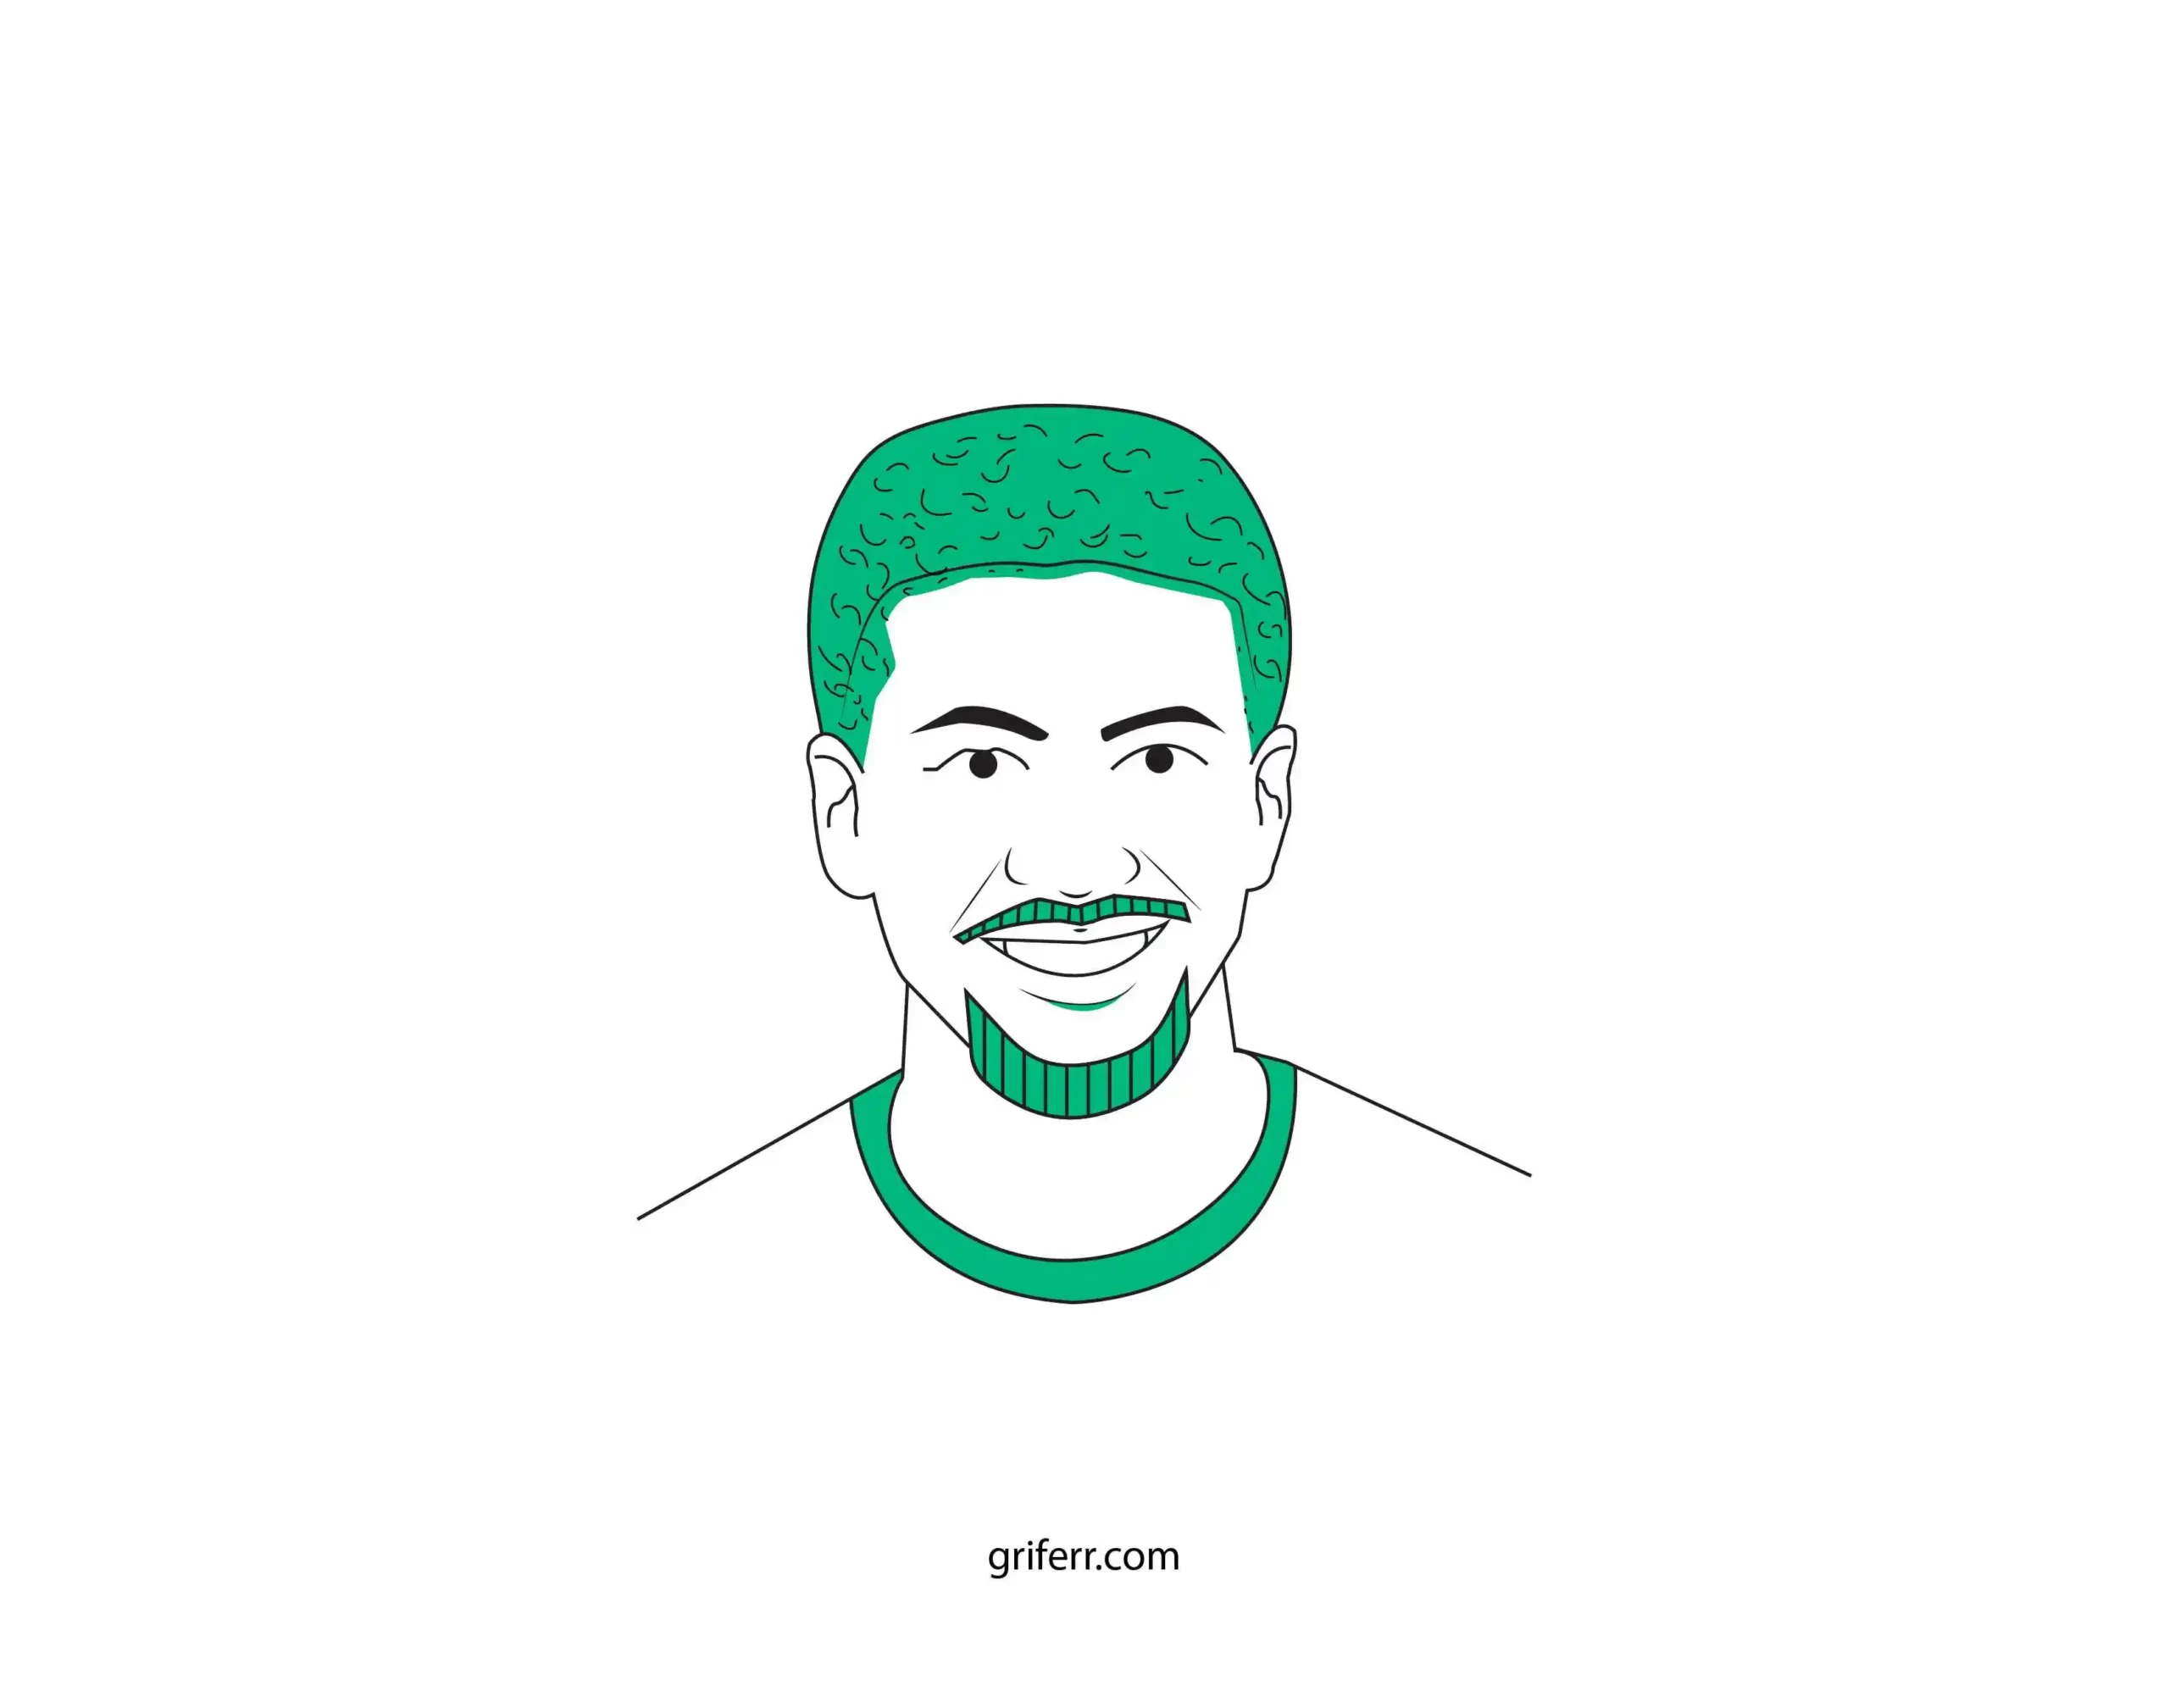 Outline portrait design of a confident man with a beard against a neutral background.